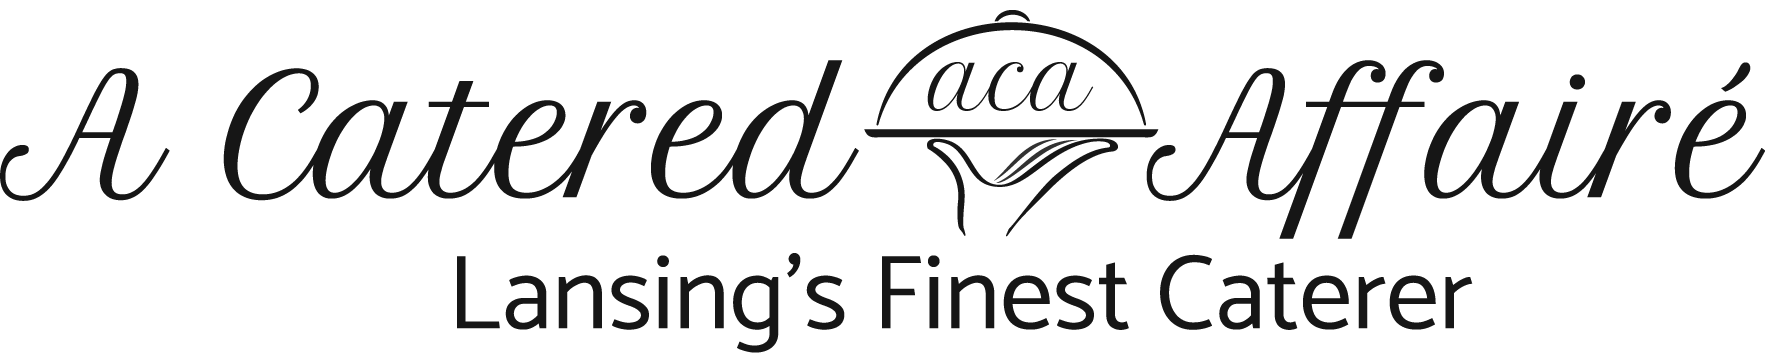 a catered affaire lansing michigan logo